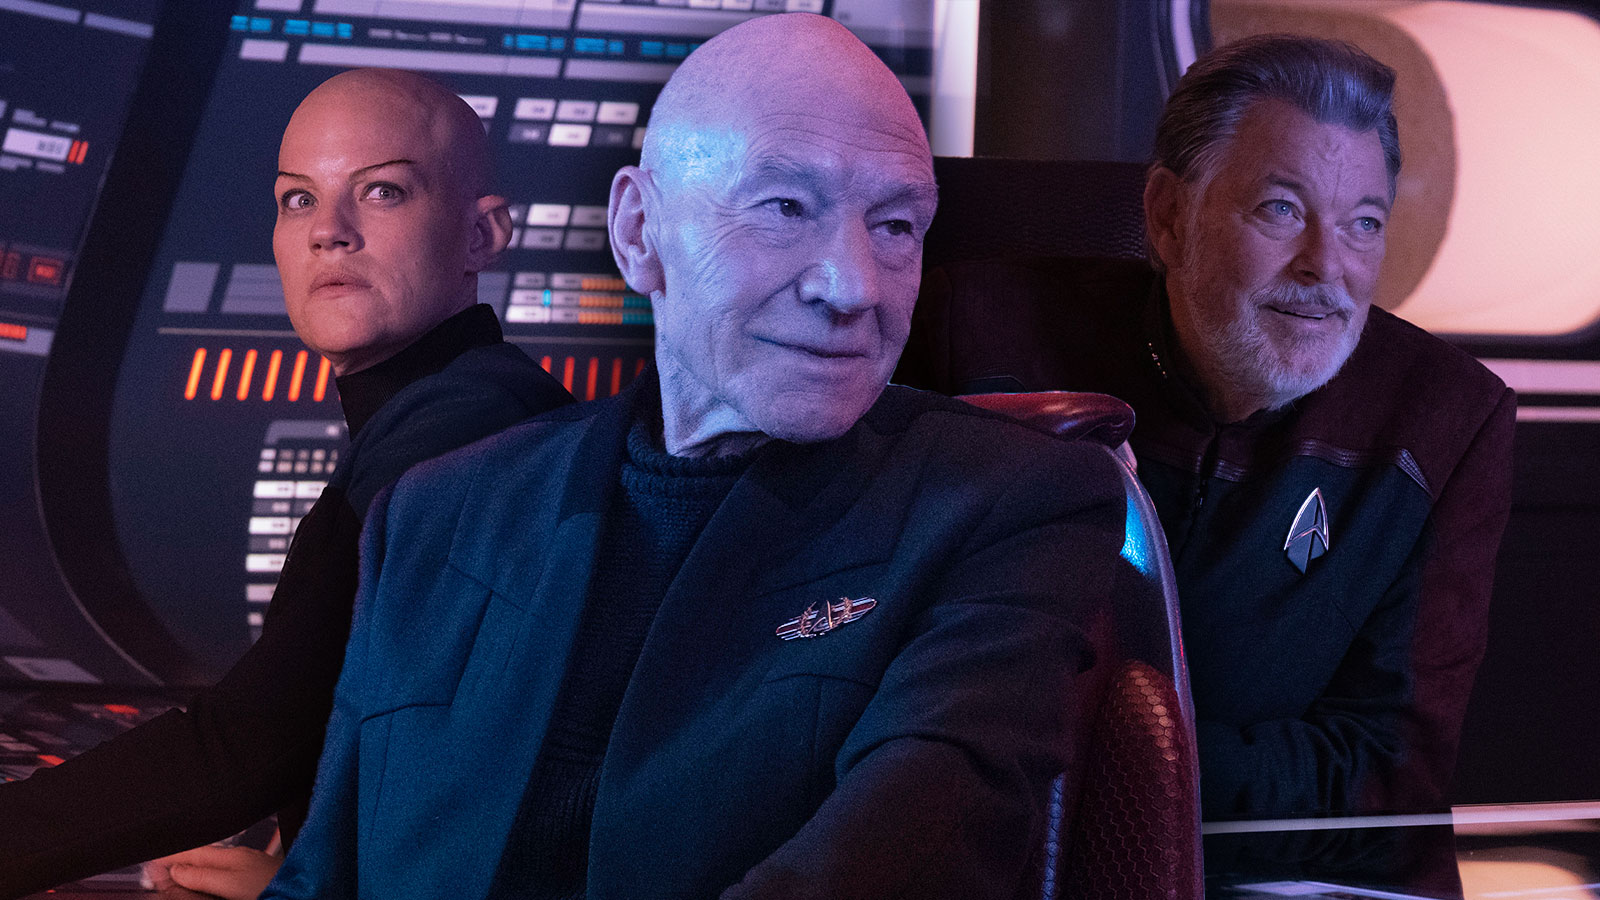 Star Trek: Picard Season 3 Episode 4 “No Win Scenario” Review: Out of the frying pan, into the fire